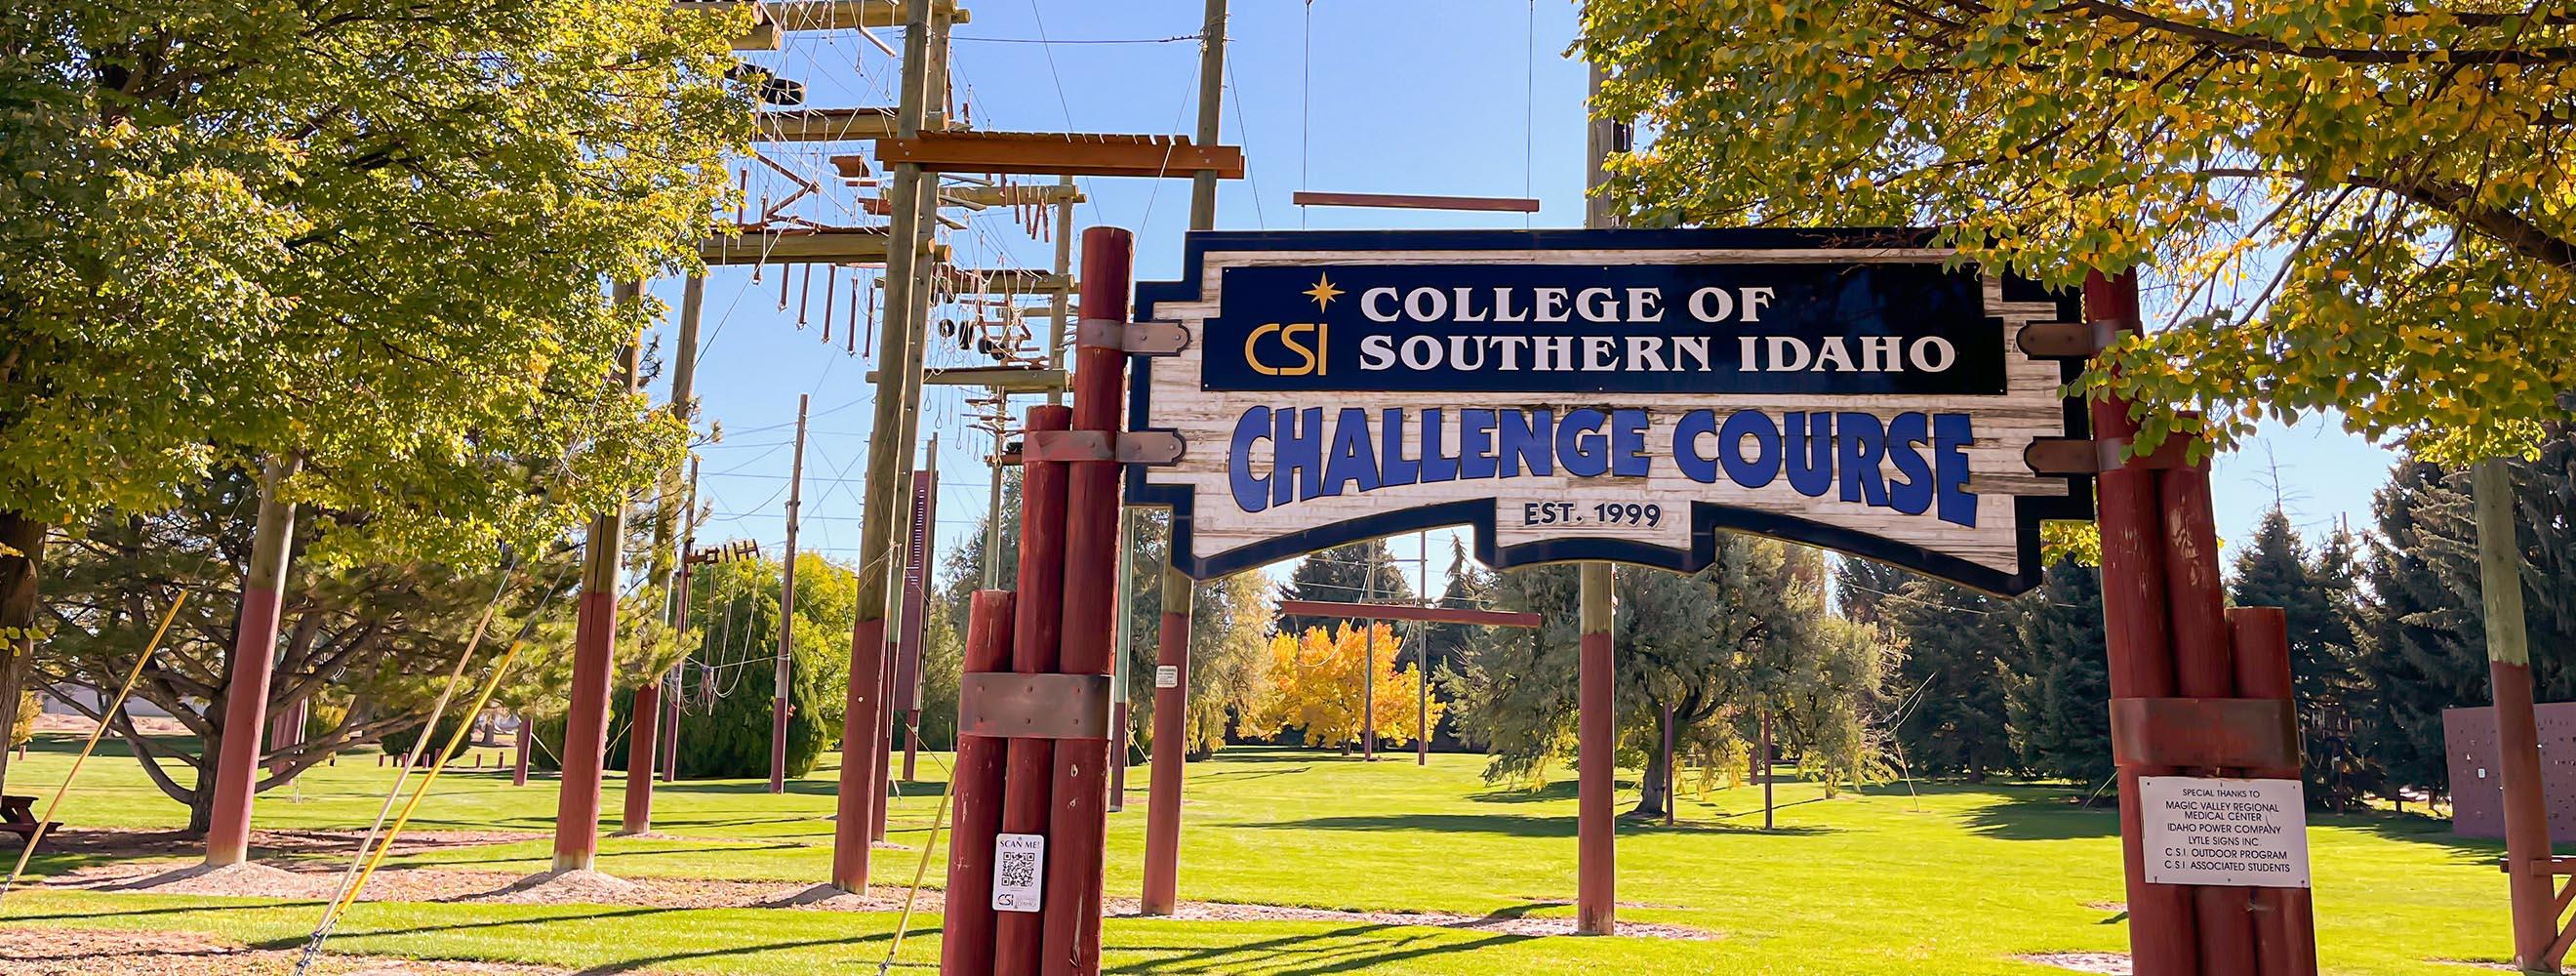 Outdoor Challenge Course Entrance Sign